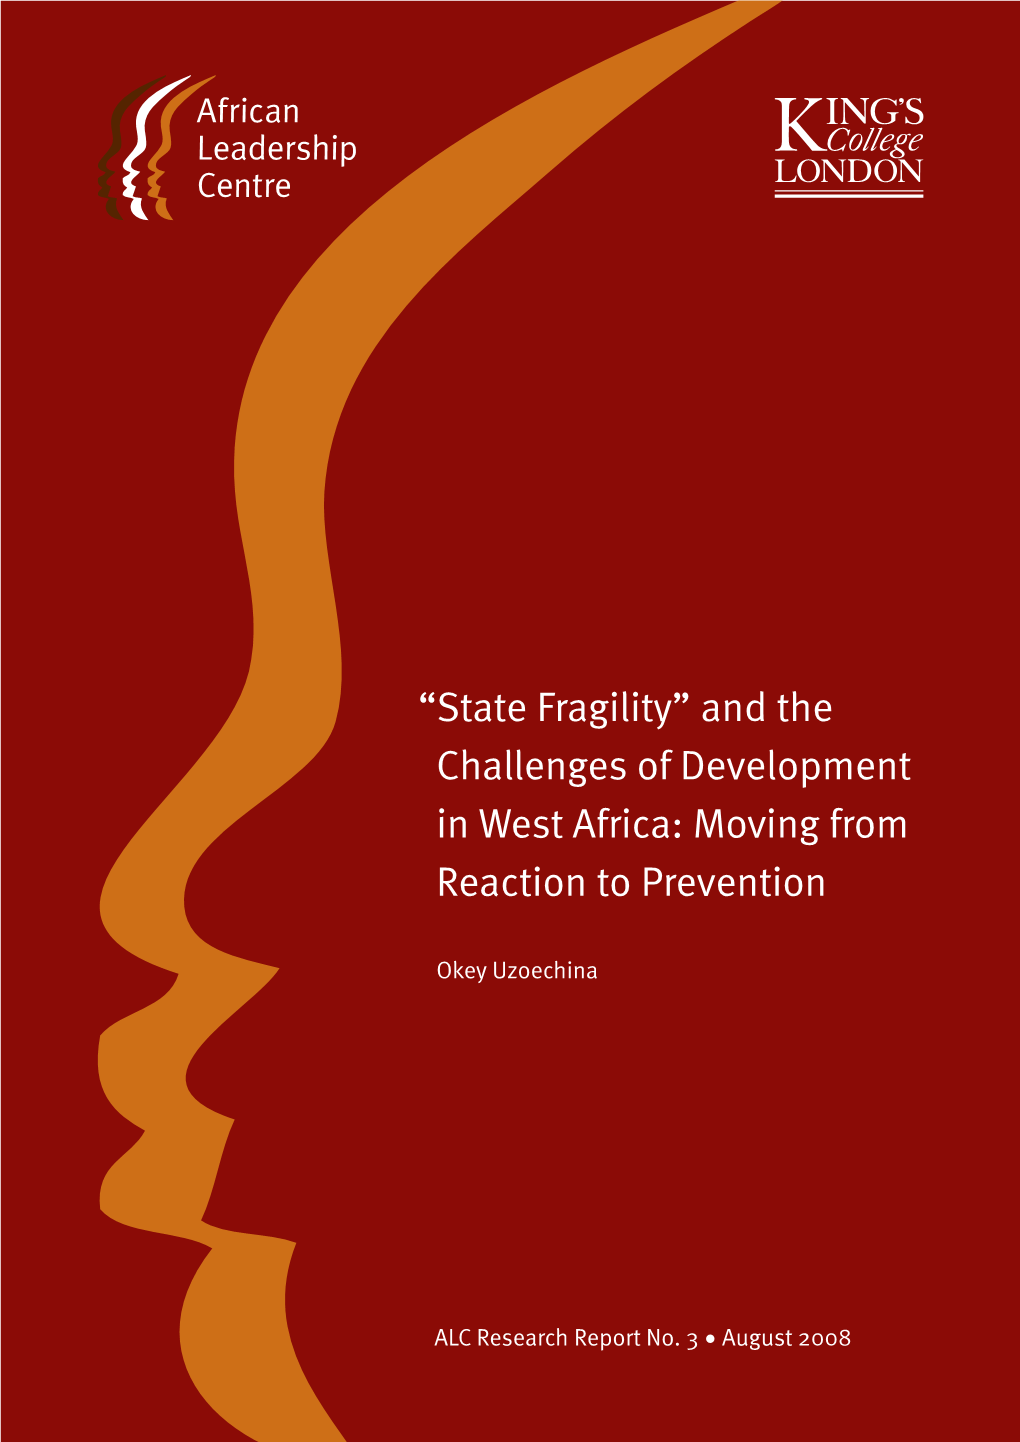 “State Fragility” and the Challenges of Development in West Africa: Moving from Reaction to Prevention